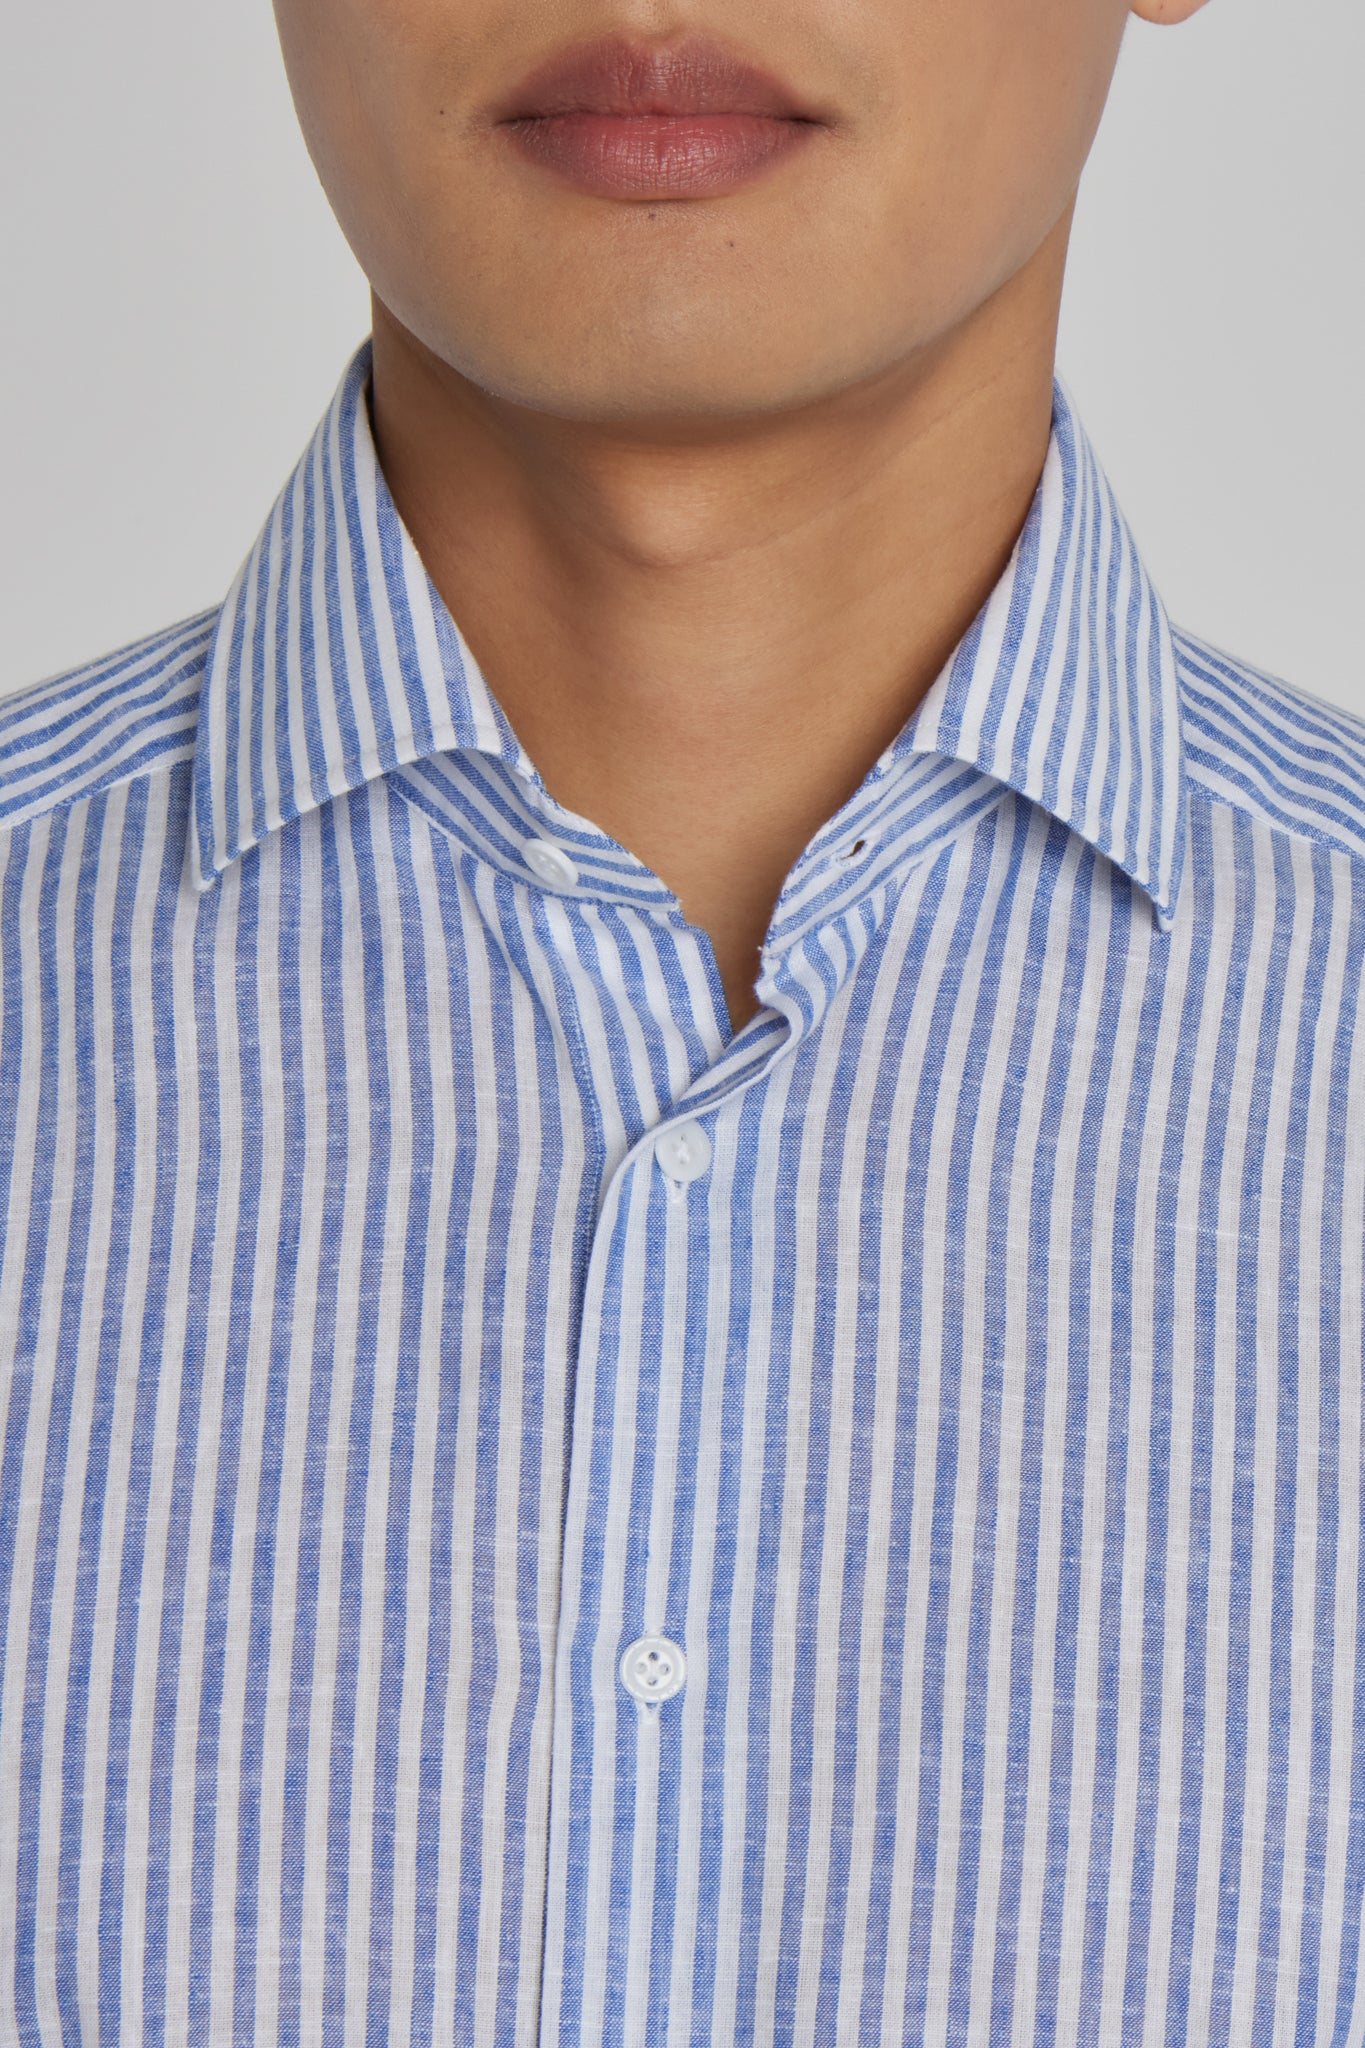 Alt view 1 Striped Linen and Cotton Shirt in Blue and White